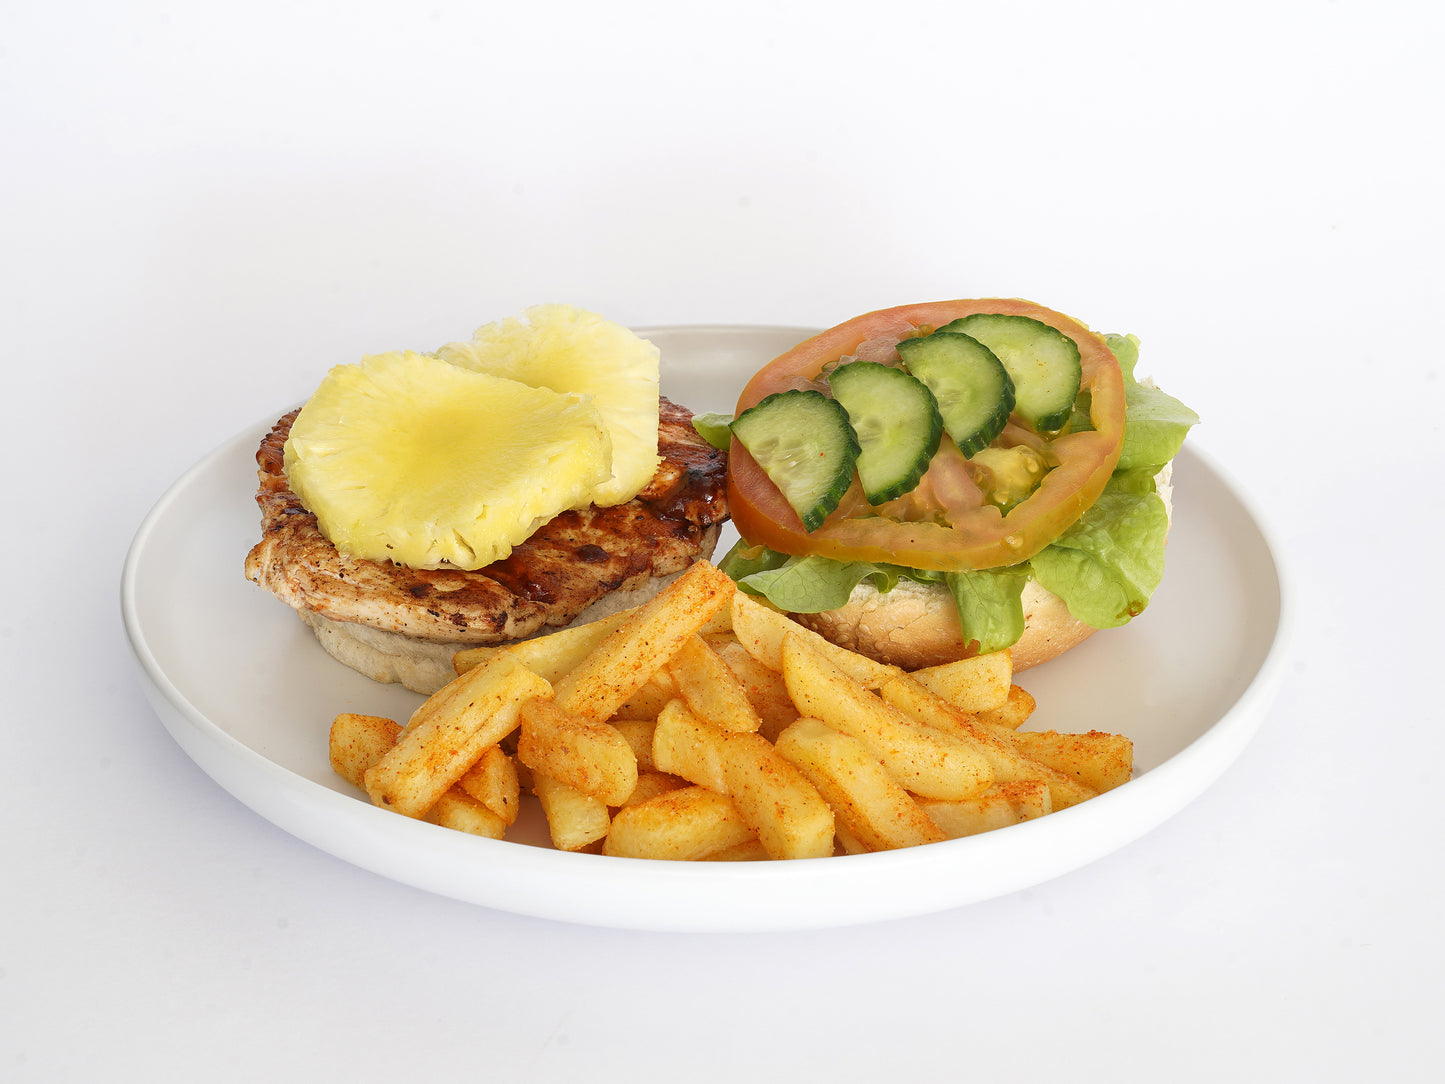 Chicken Burger with Pineapple and Chips